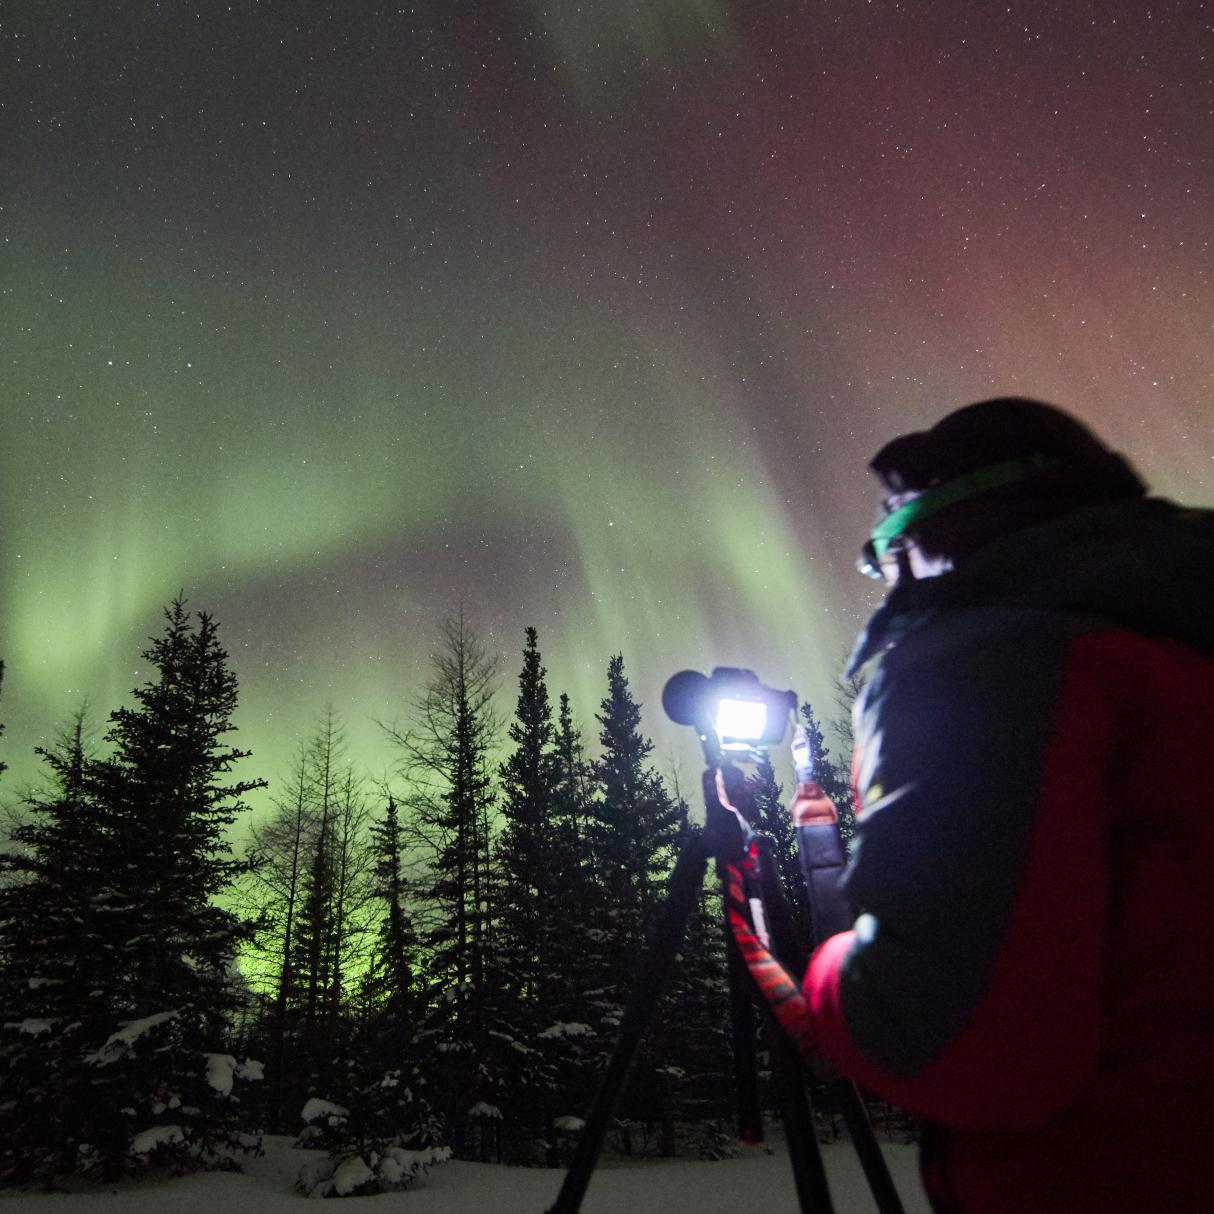 Someone taking a picture of the Northern Lights